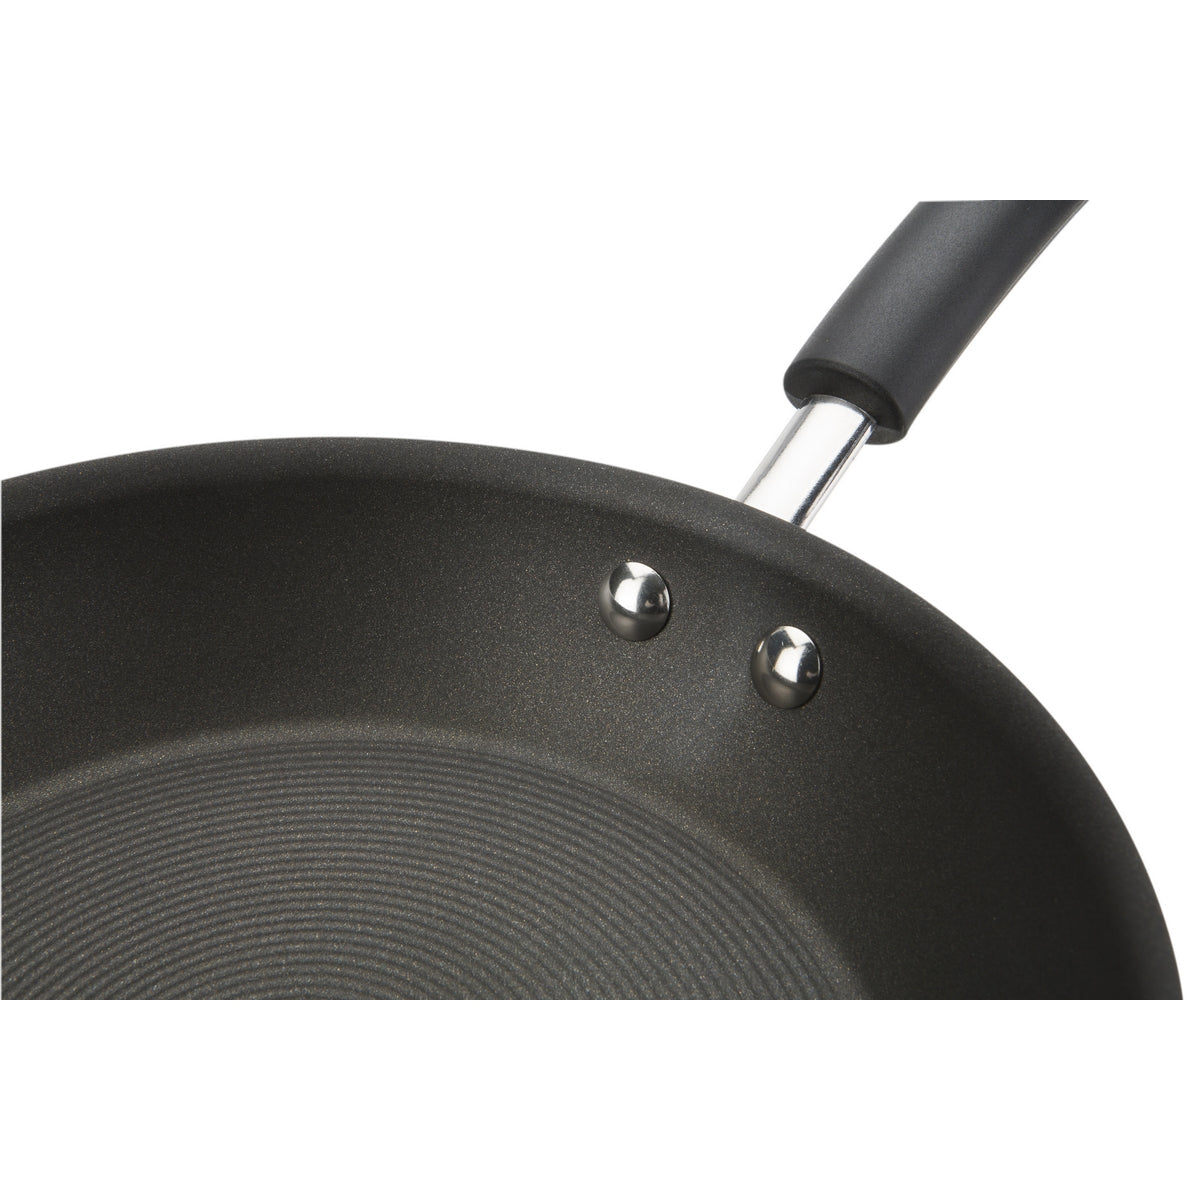 Total non-stick frying pan set from Circulon features our unique Hi-Low non-stick system where food will not stick - guaranteed